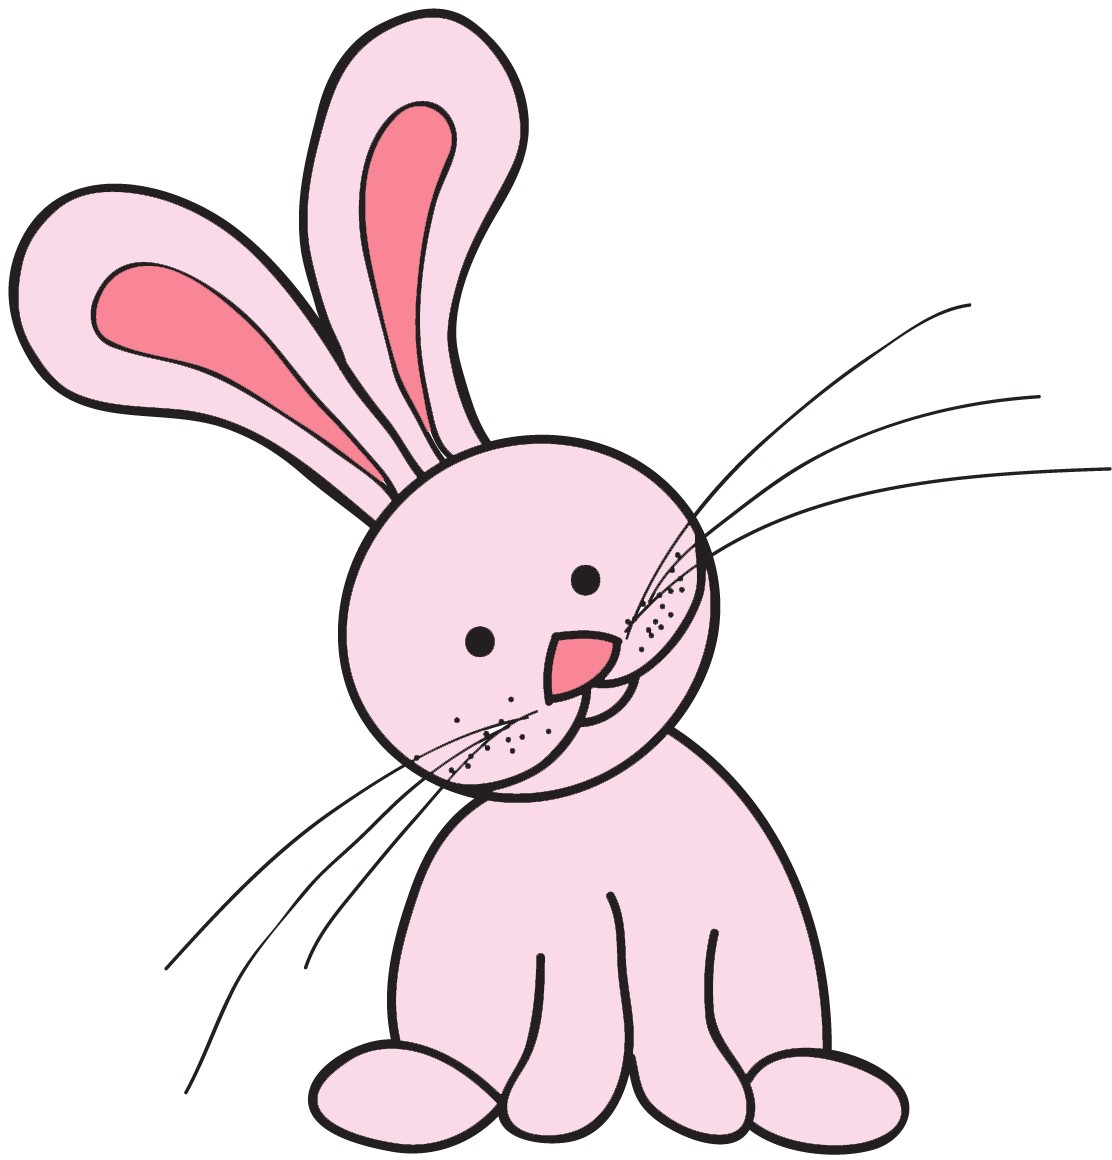 Animated Rabbit Pictures - ClipArt Best